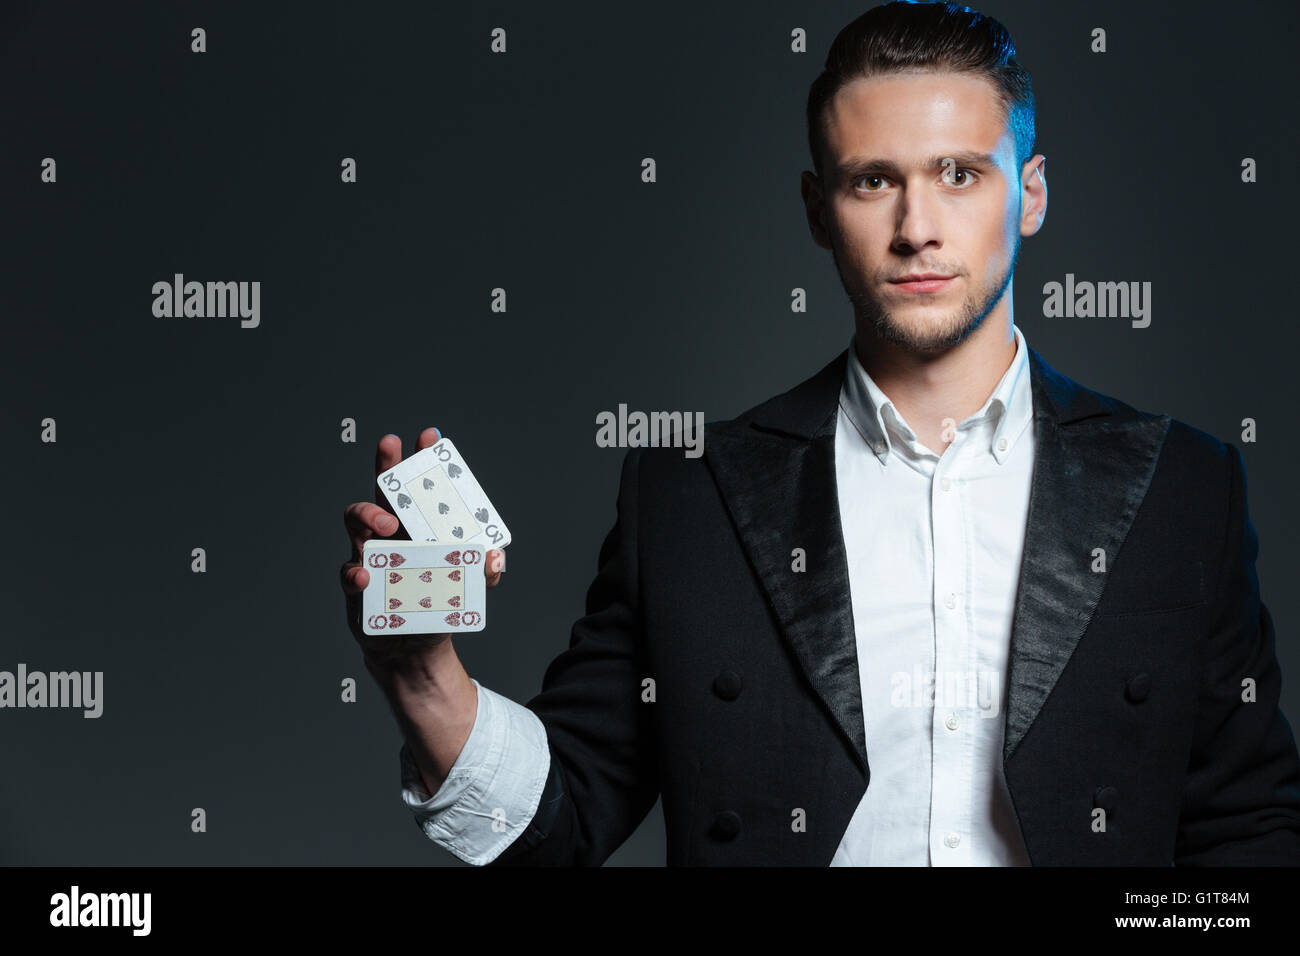 Serious young man magician standing and holding two playing cards over grey background Stock Photo